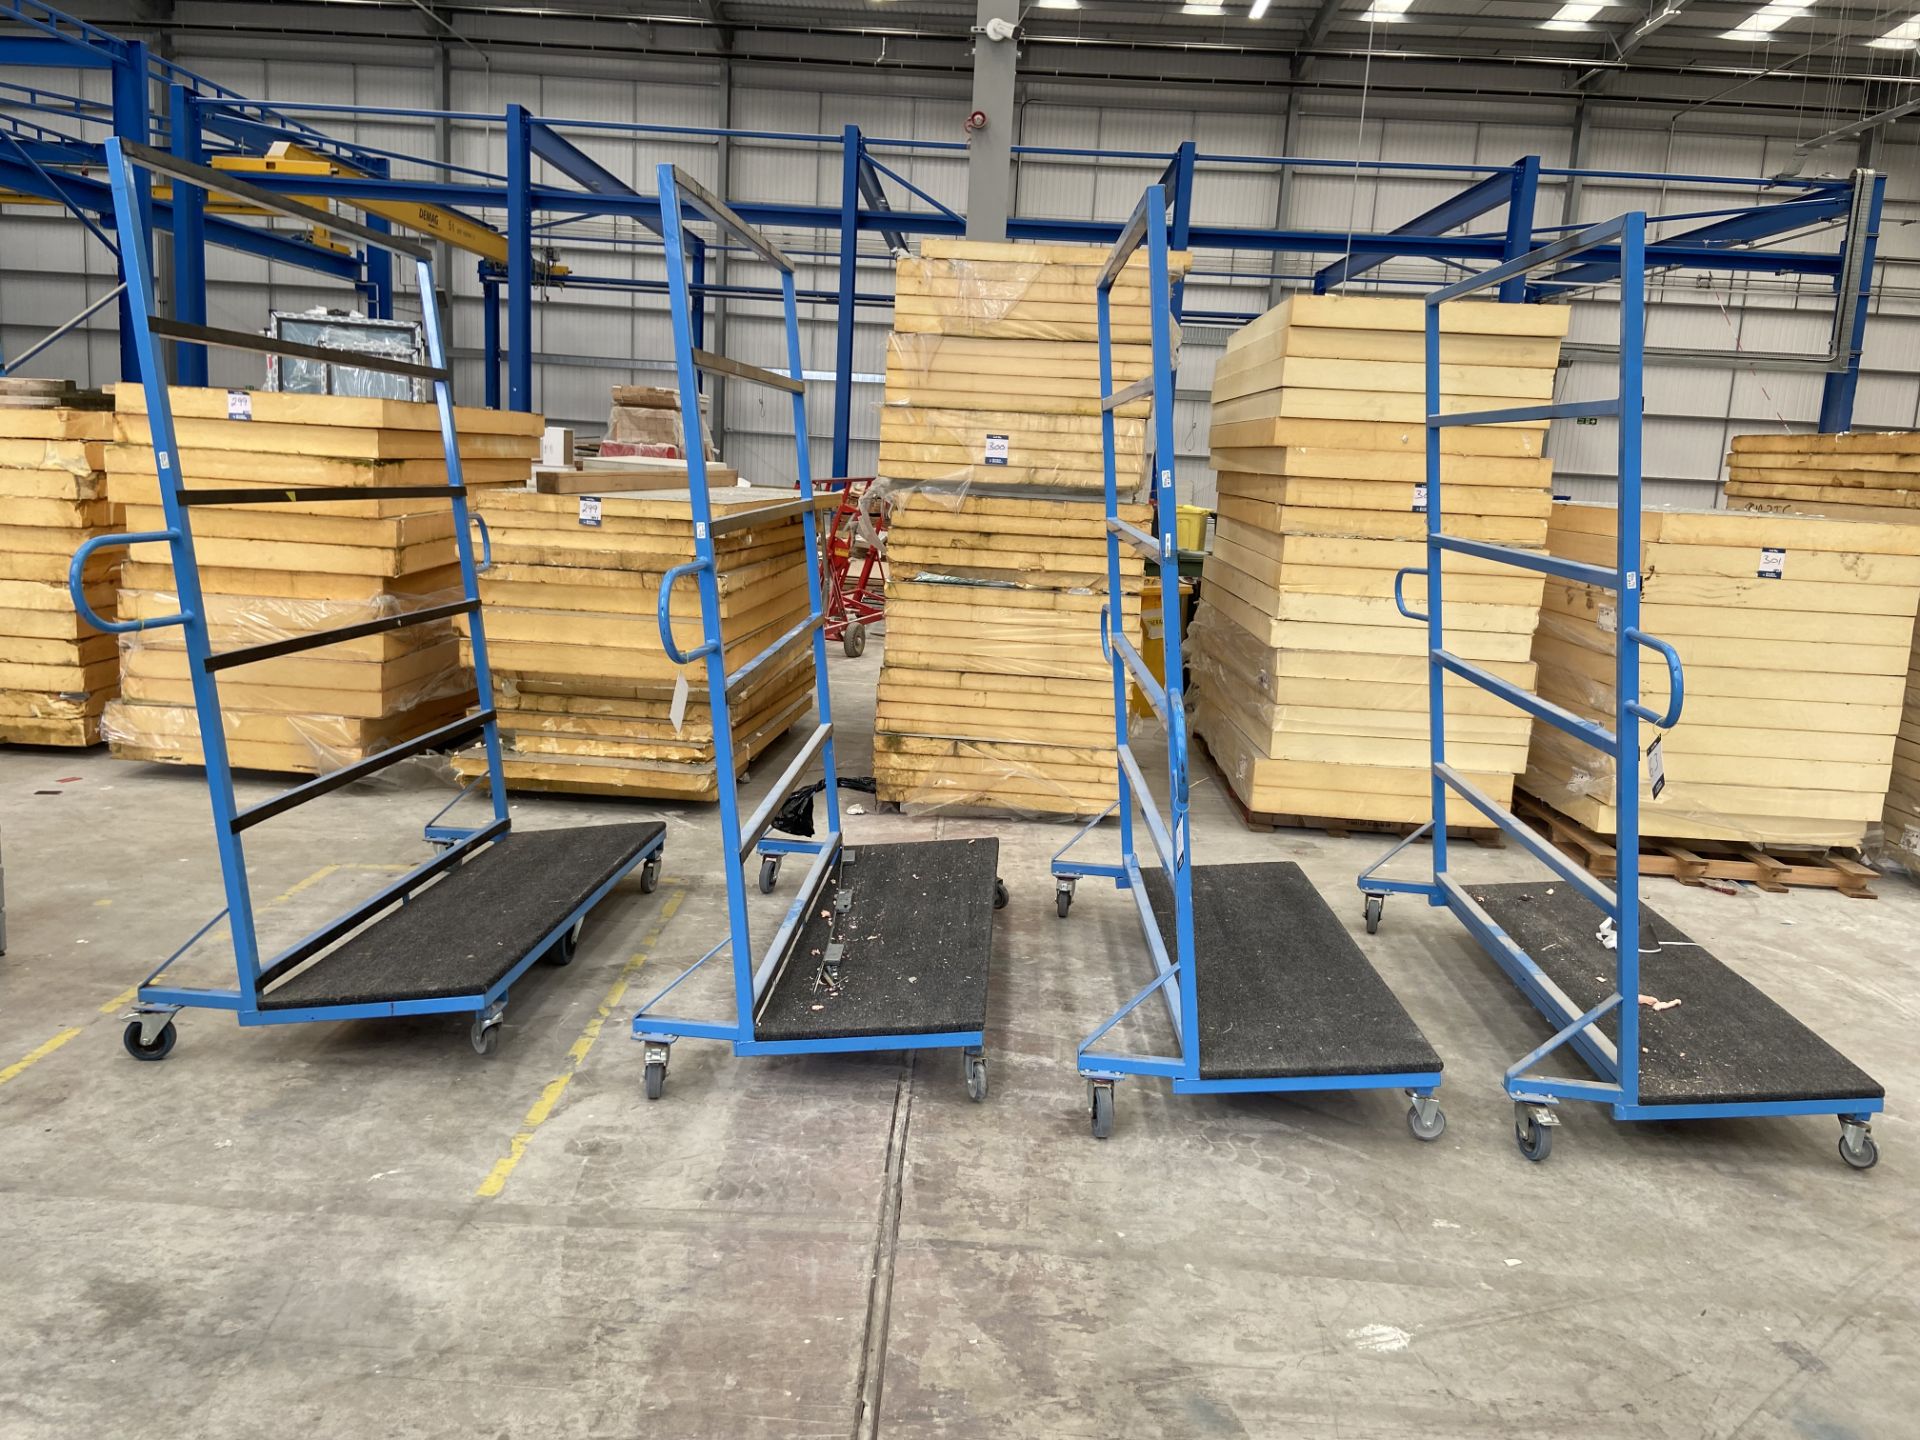 4 x Steely mobile panel rack with carpeted base SWL 500kg, previously used for glass